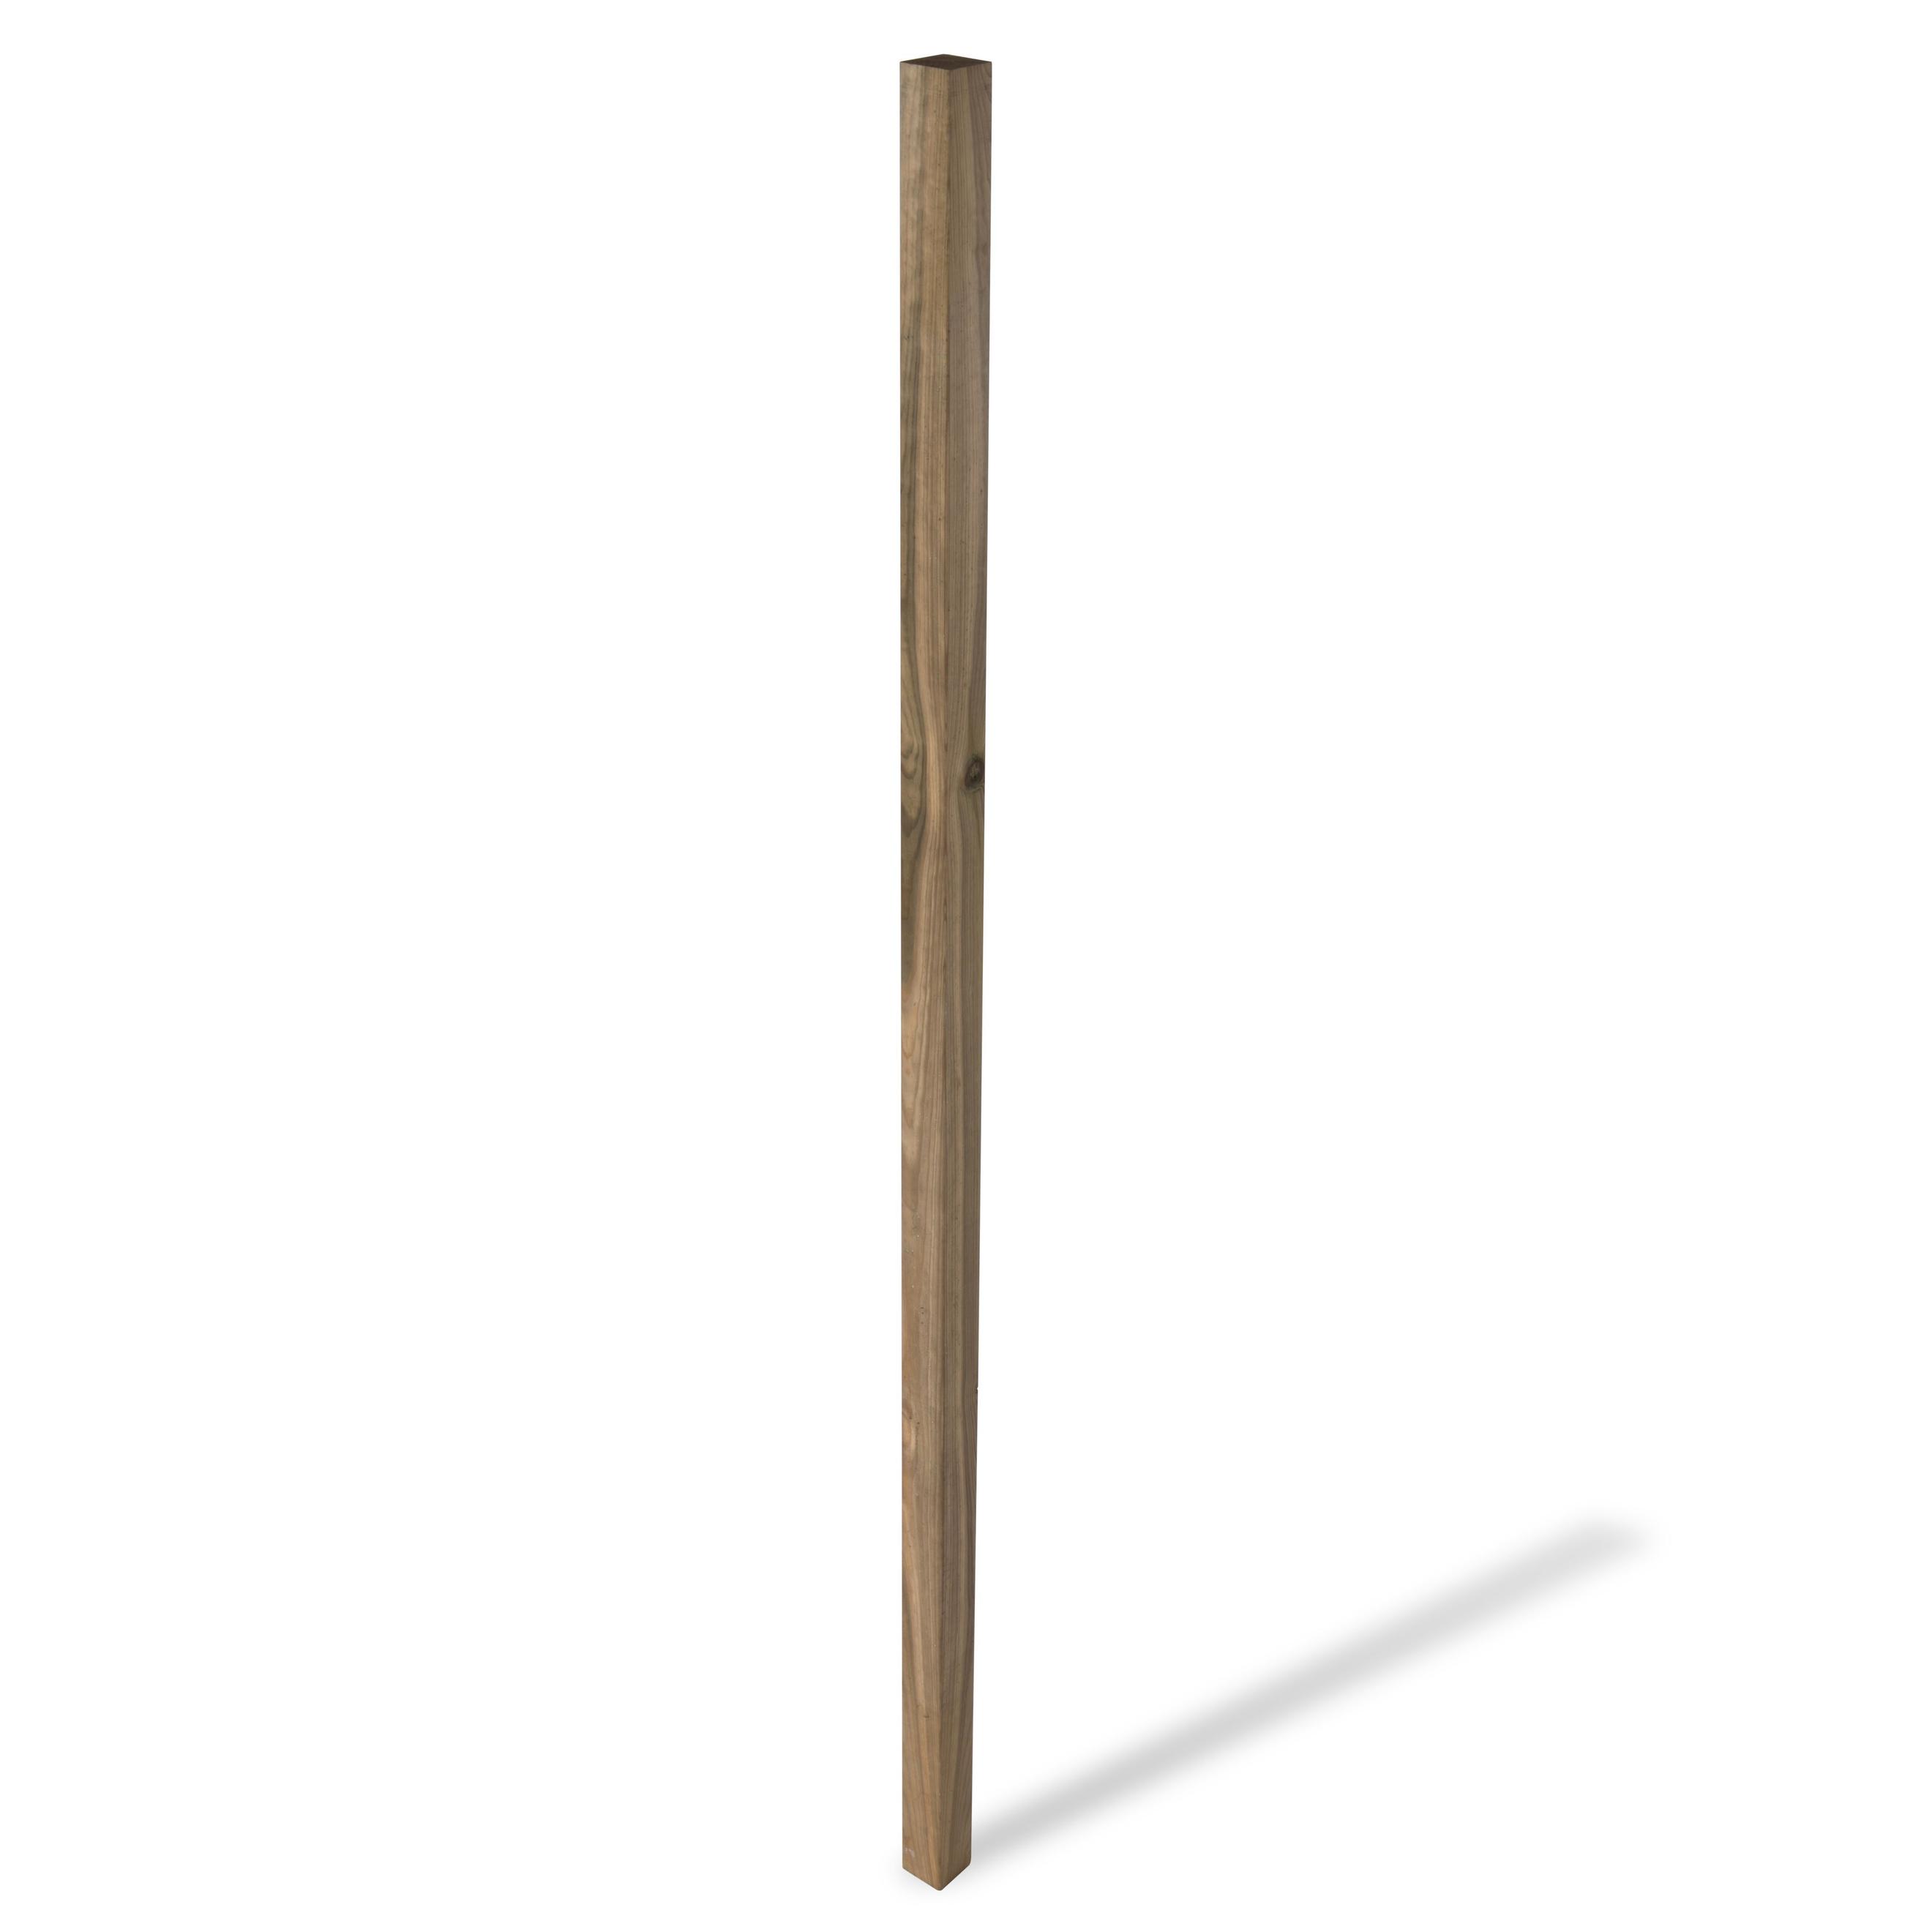 Klikstrom UC4 Natural Wooden Fence post (H)2.4m (W)70mm offers at £17 in B&Q